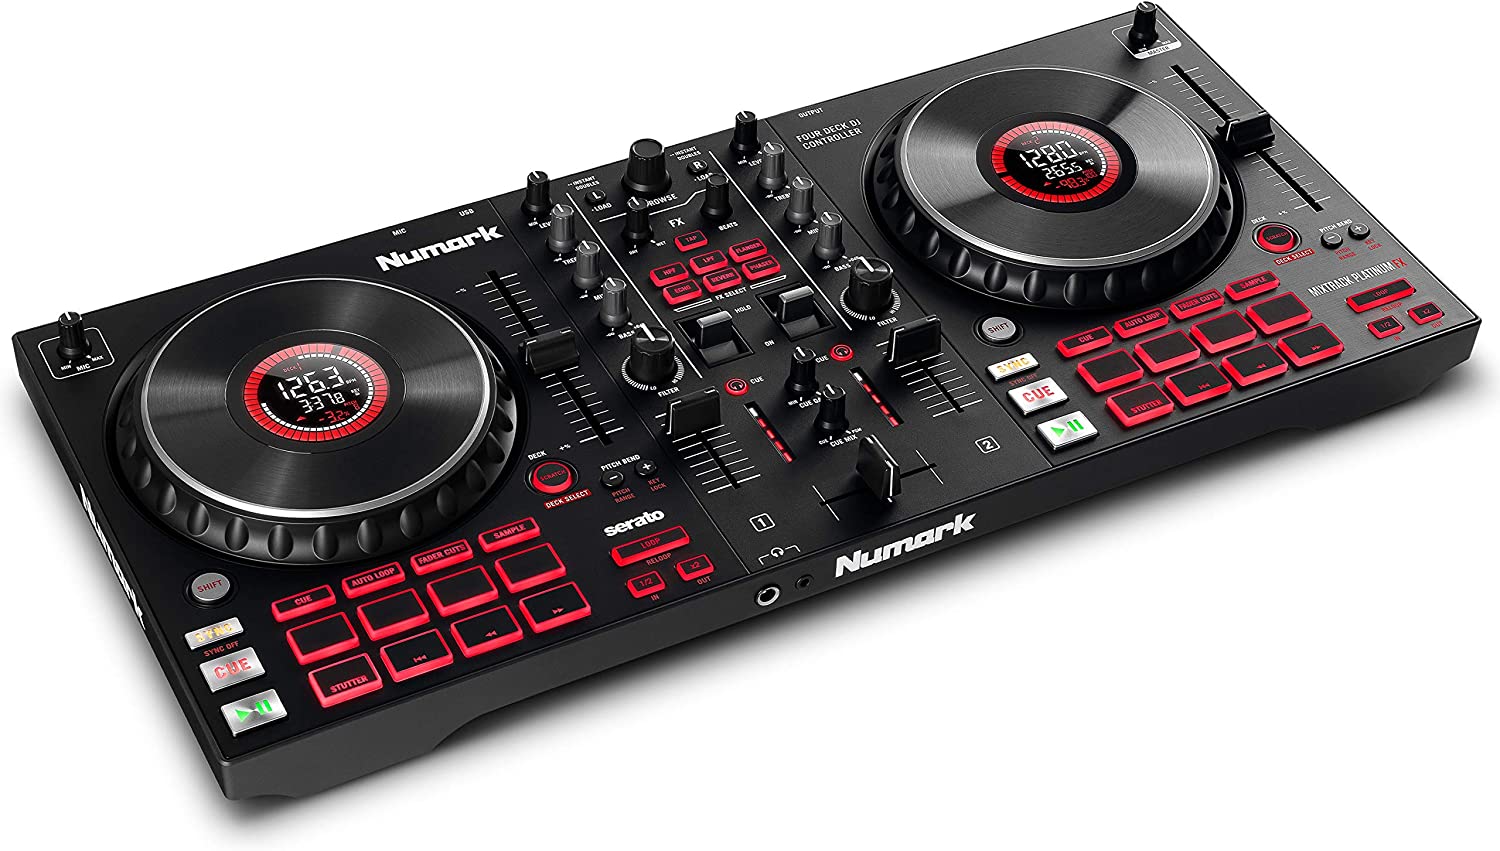 Picture of Numark Mixtrack Platinum FX - DJ Controller For Serato DJ with 4 Deck Control, DJ Mixer, Built-in Audio Interface, Jog Wheel Displays and FX Paddles